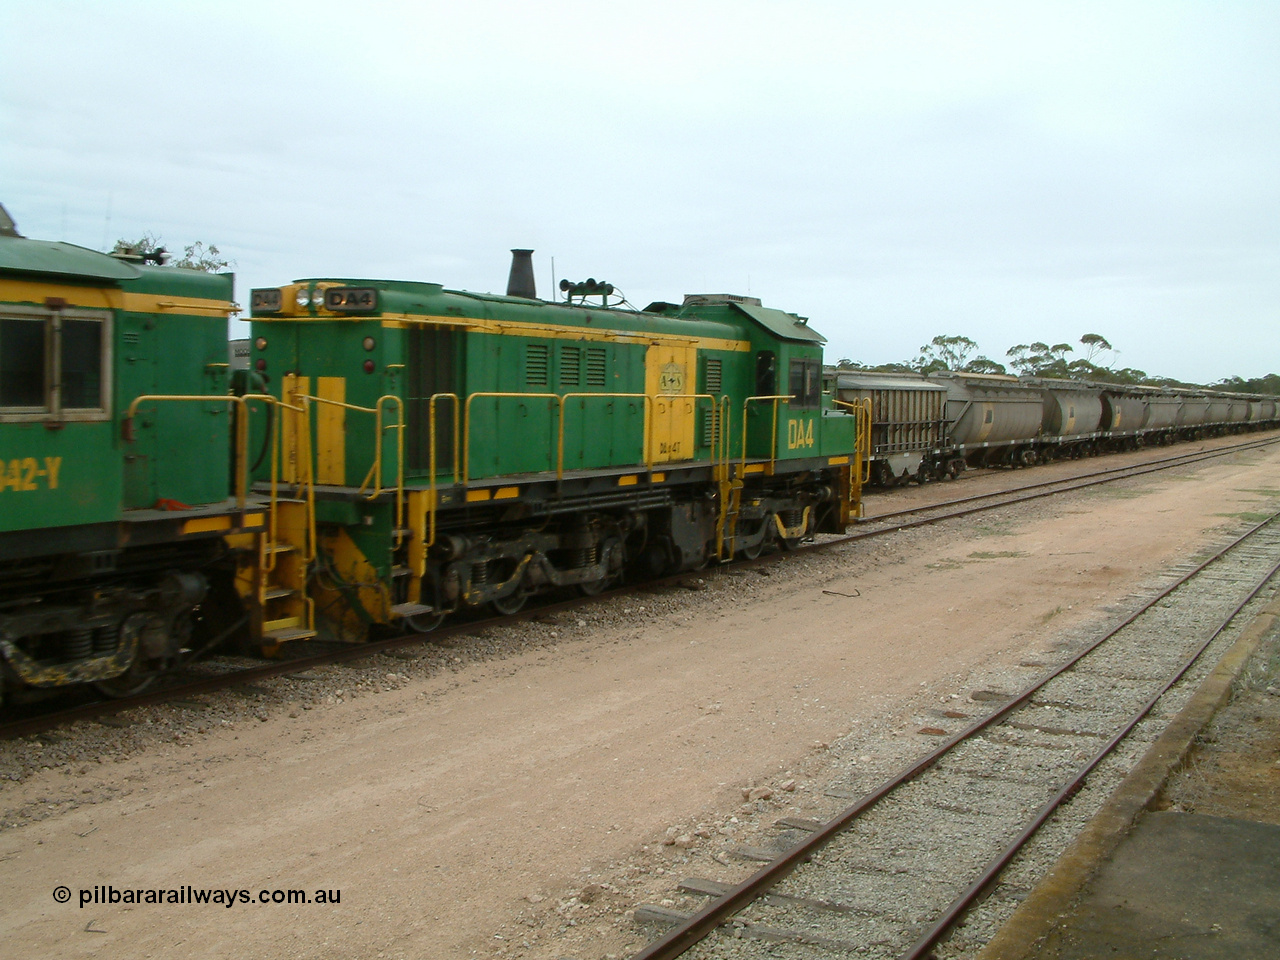 030407 114344
Poochera, empty grain train arrives behind former Australian National locomotive rebuilt from former AE Goodwin ALCo model DL531 830 class ex 839 serial 83730 by Port Augusta Workshops to DA class unit DA 4 to shunt off empty waggons and pick up the loaded ones. 7th April 2003.
Keywords: DA-class;DA4;83730;Port-Augusta-WS;ALCo;DL531G/1;830-class;839;rebuild;